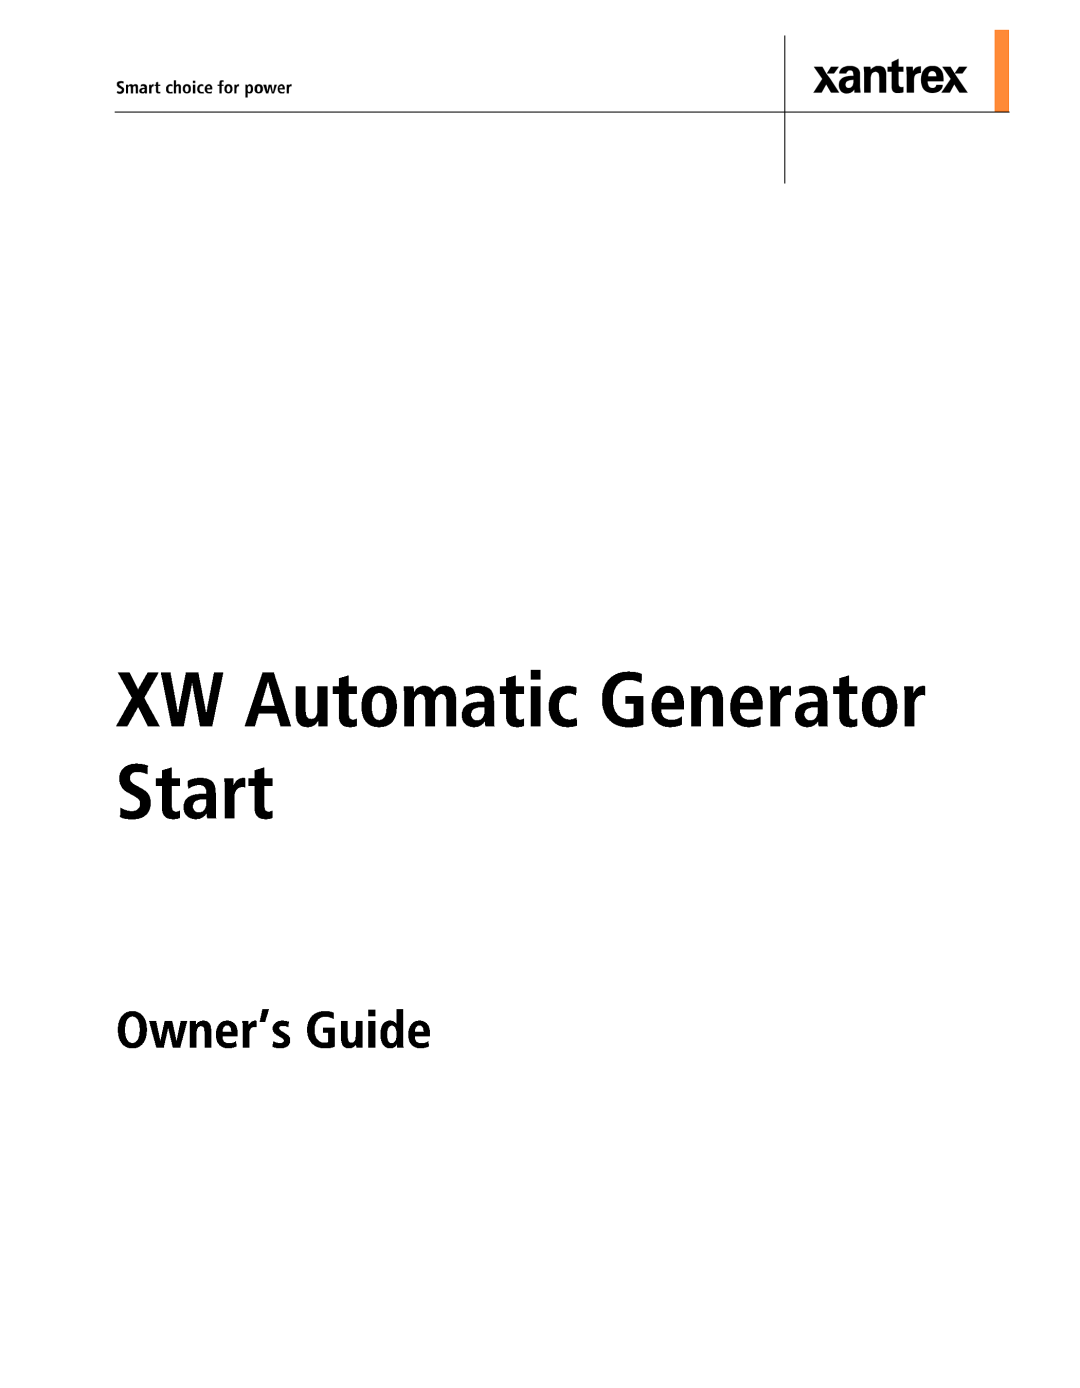 Xantrex Technology manual Owner’s Guide, XW Automatic Generator Start 